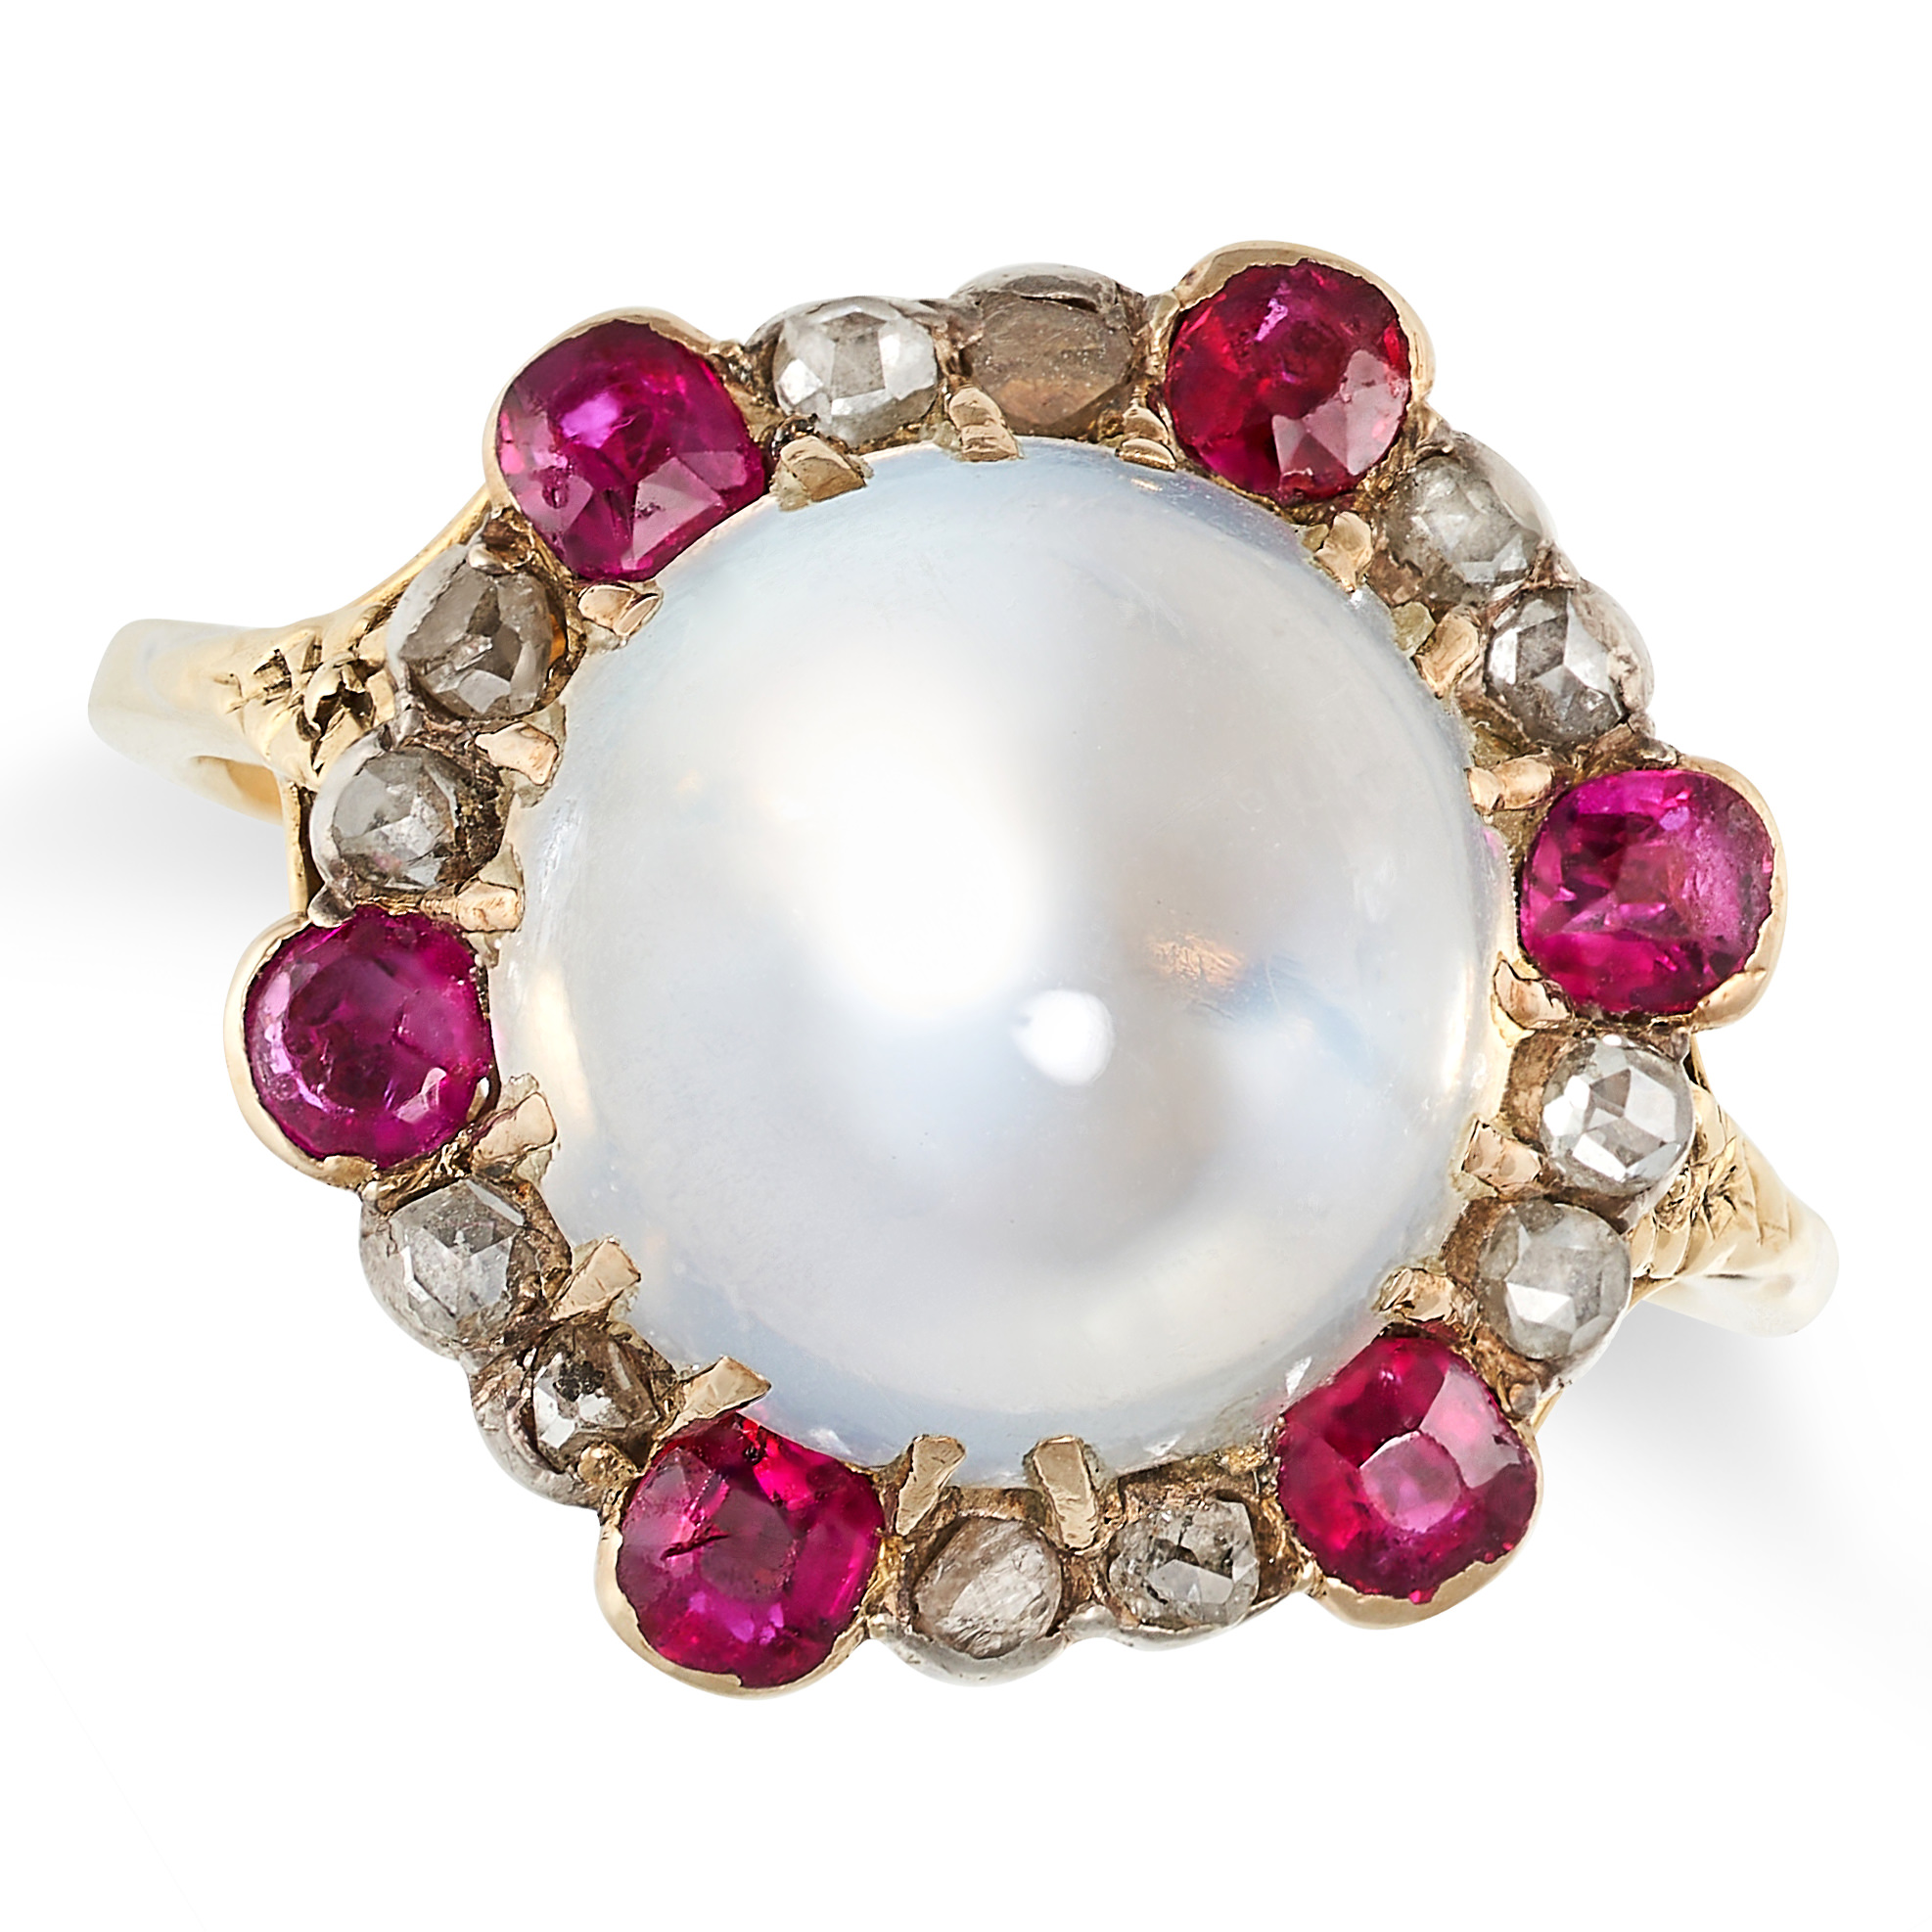 AN ANTIQUE MOONSTONE, RUBY AND DIAMOND RING in yellow gold, set with a round cabochon moonstone in a